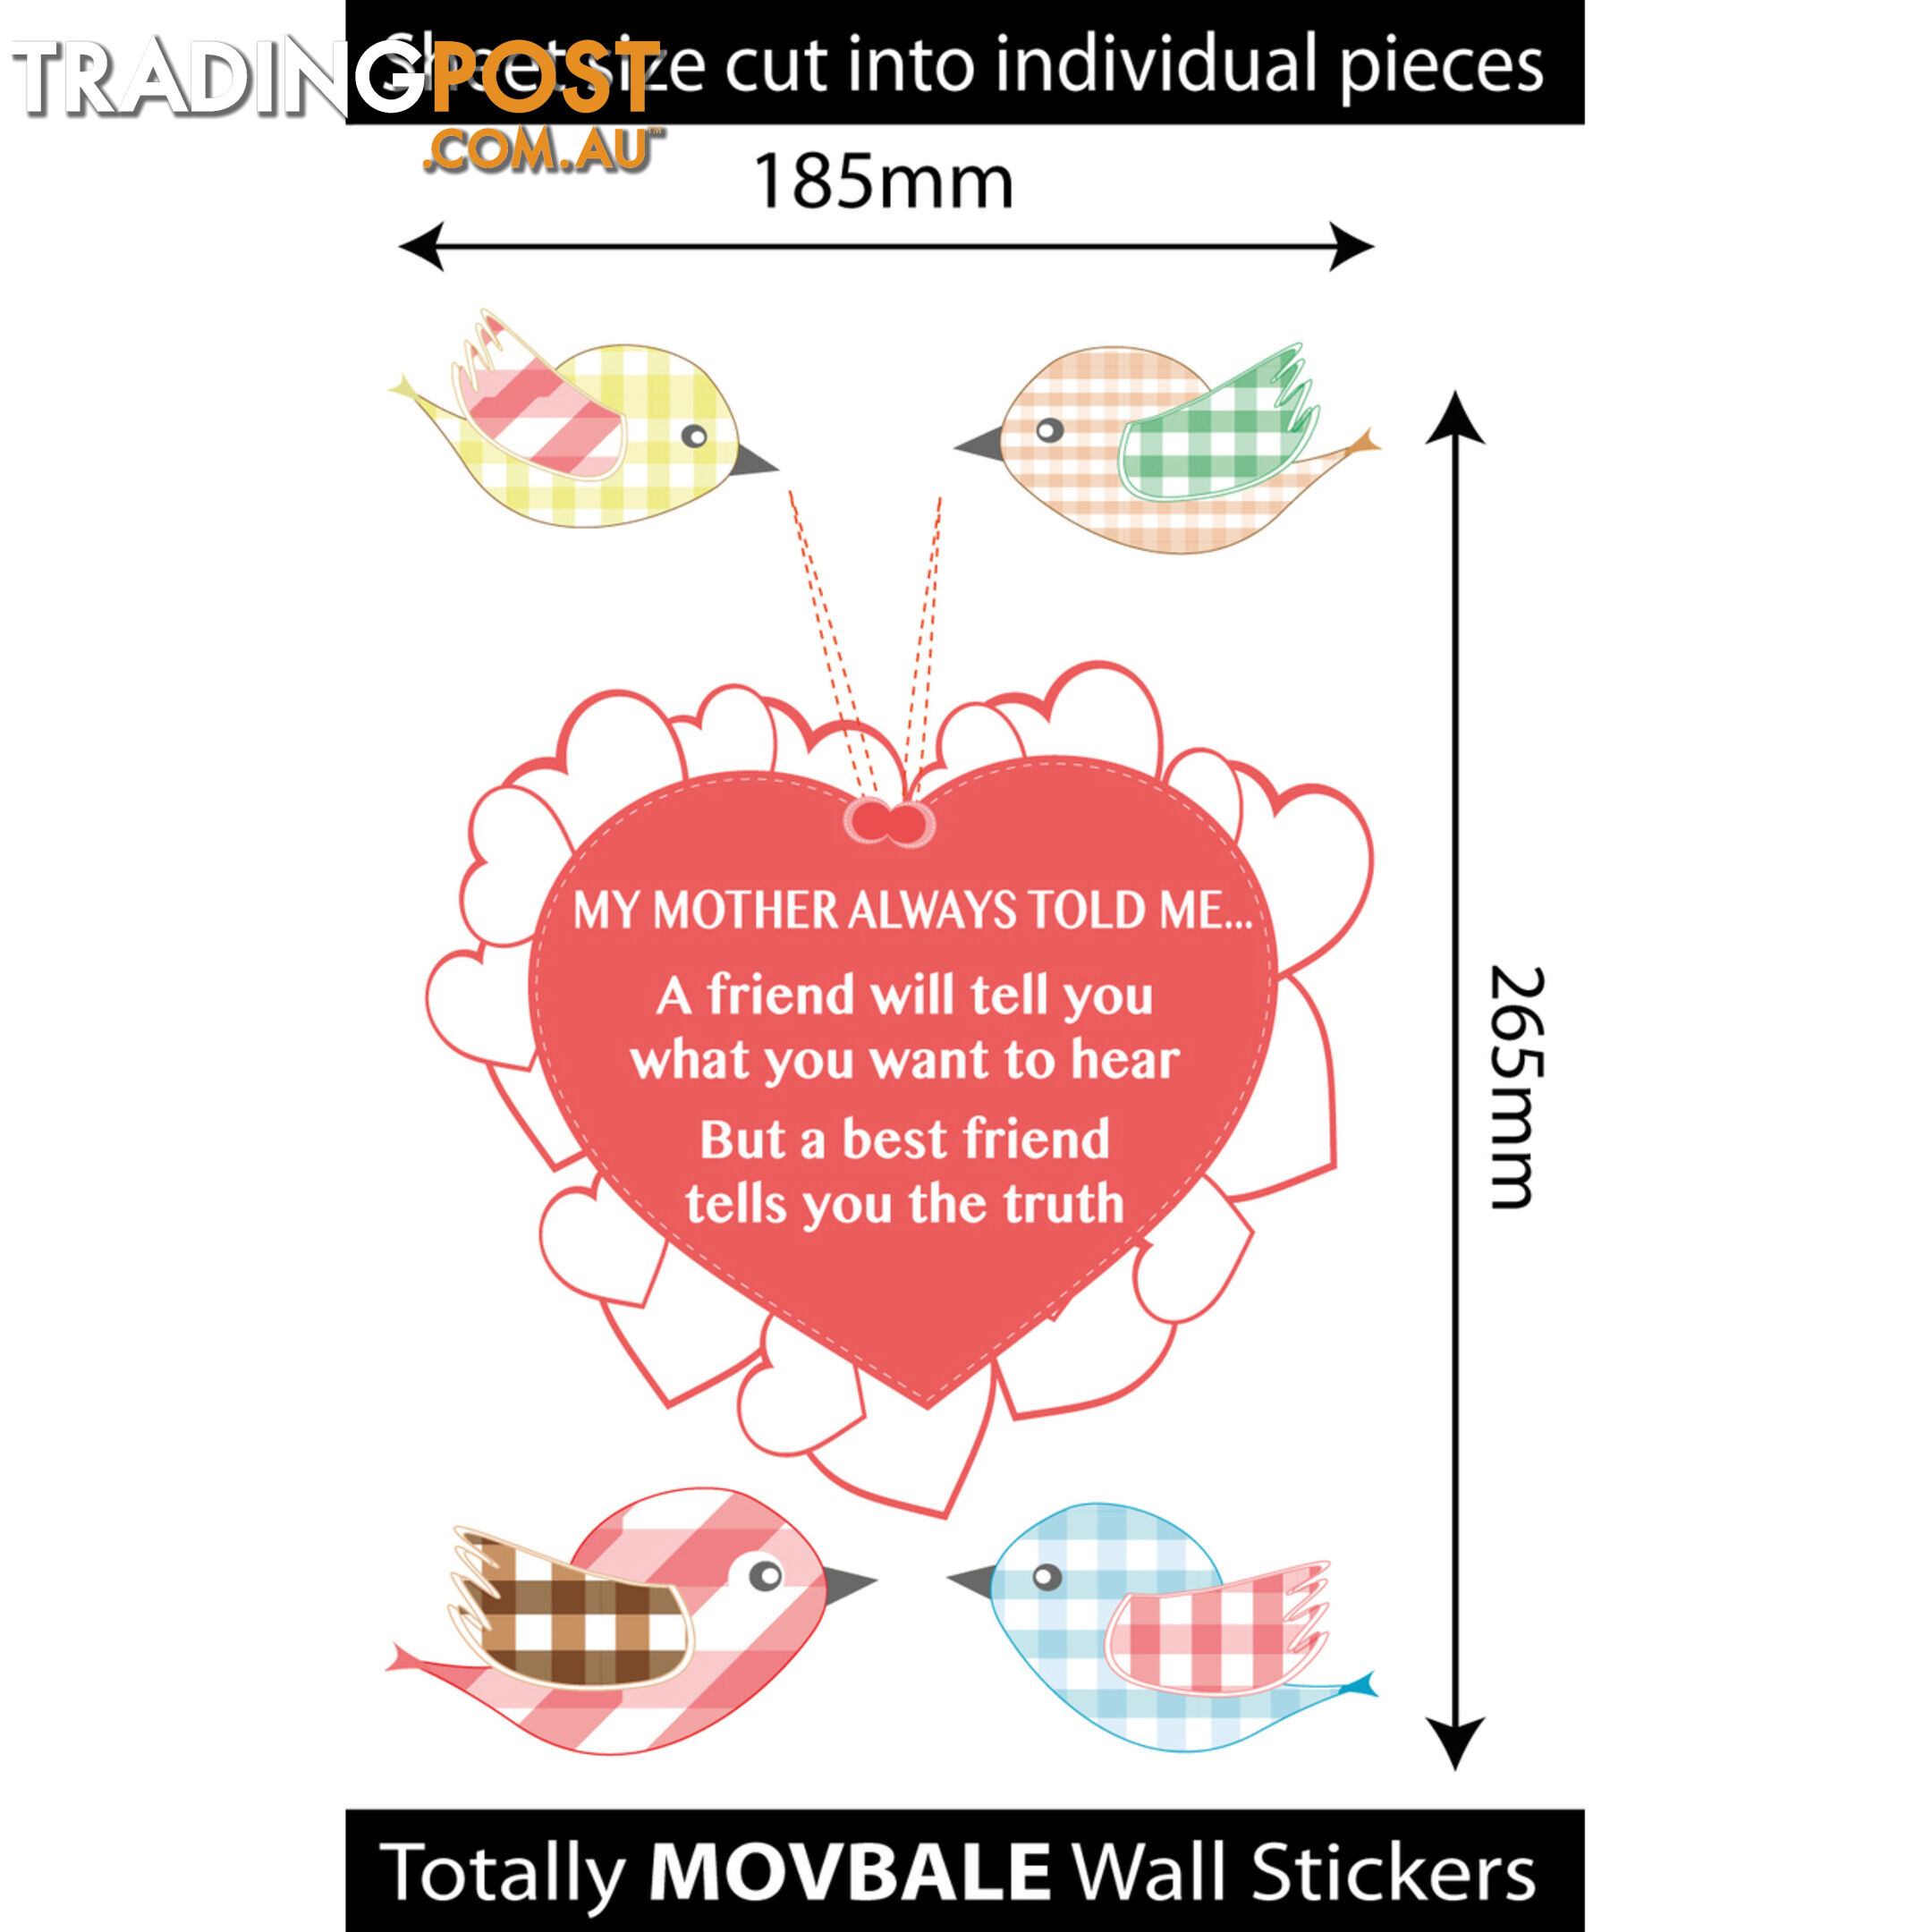 Medium Size My Mother Told Me Wall Sticker Quotes - Totally Movable